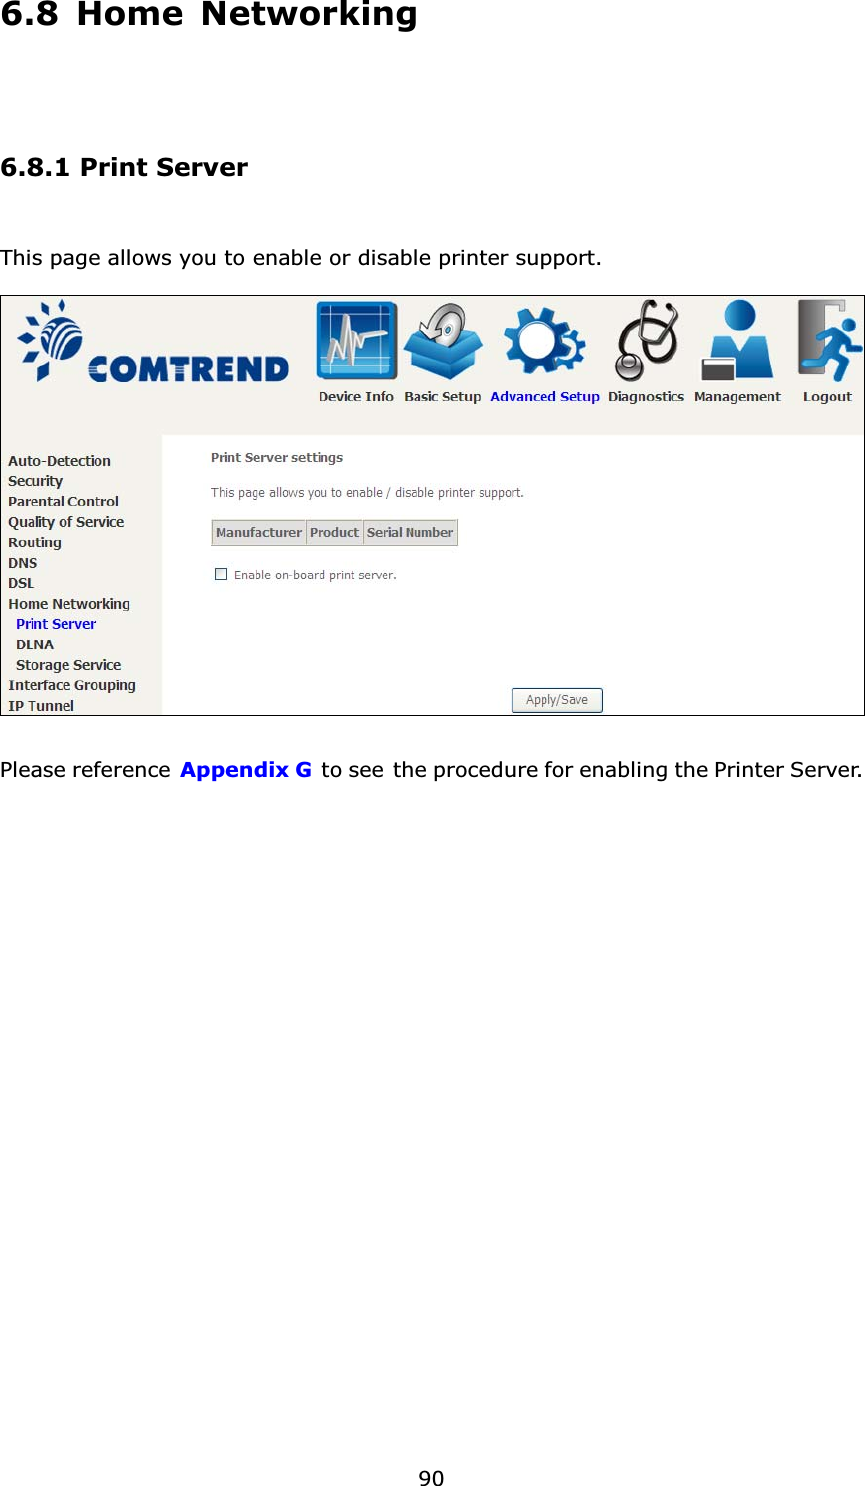 906.8 Home Networking6.8.1 Print ServerThis page allows you to enable or disable printer support.Please reference Appendix G to see the procedure for enabling the Printer Server. 